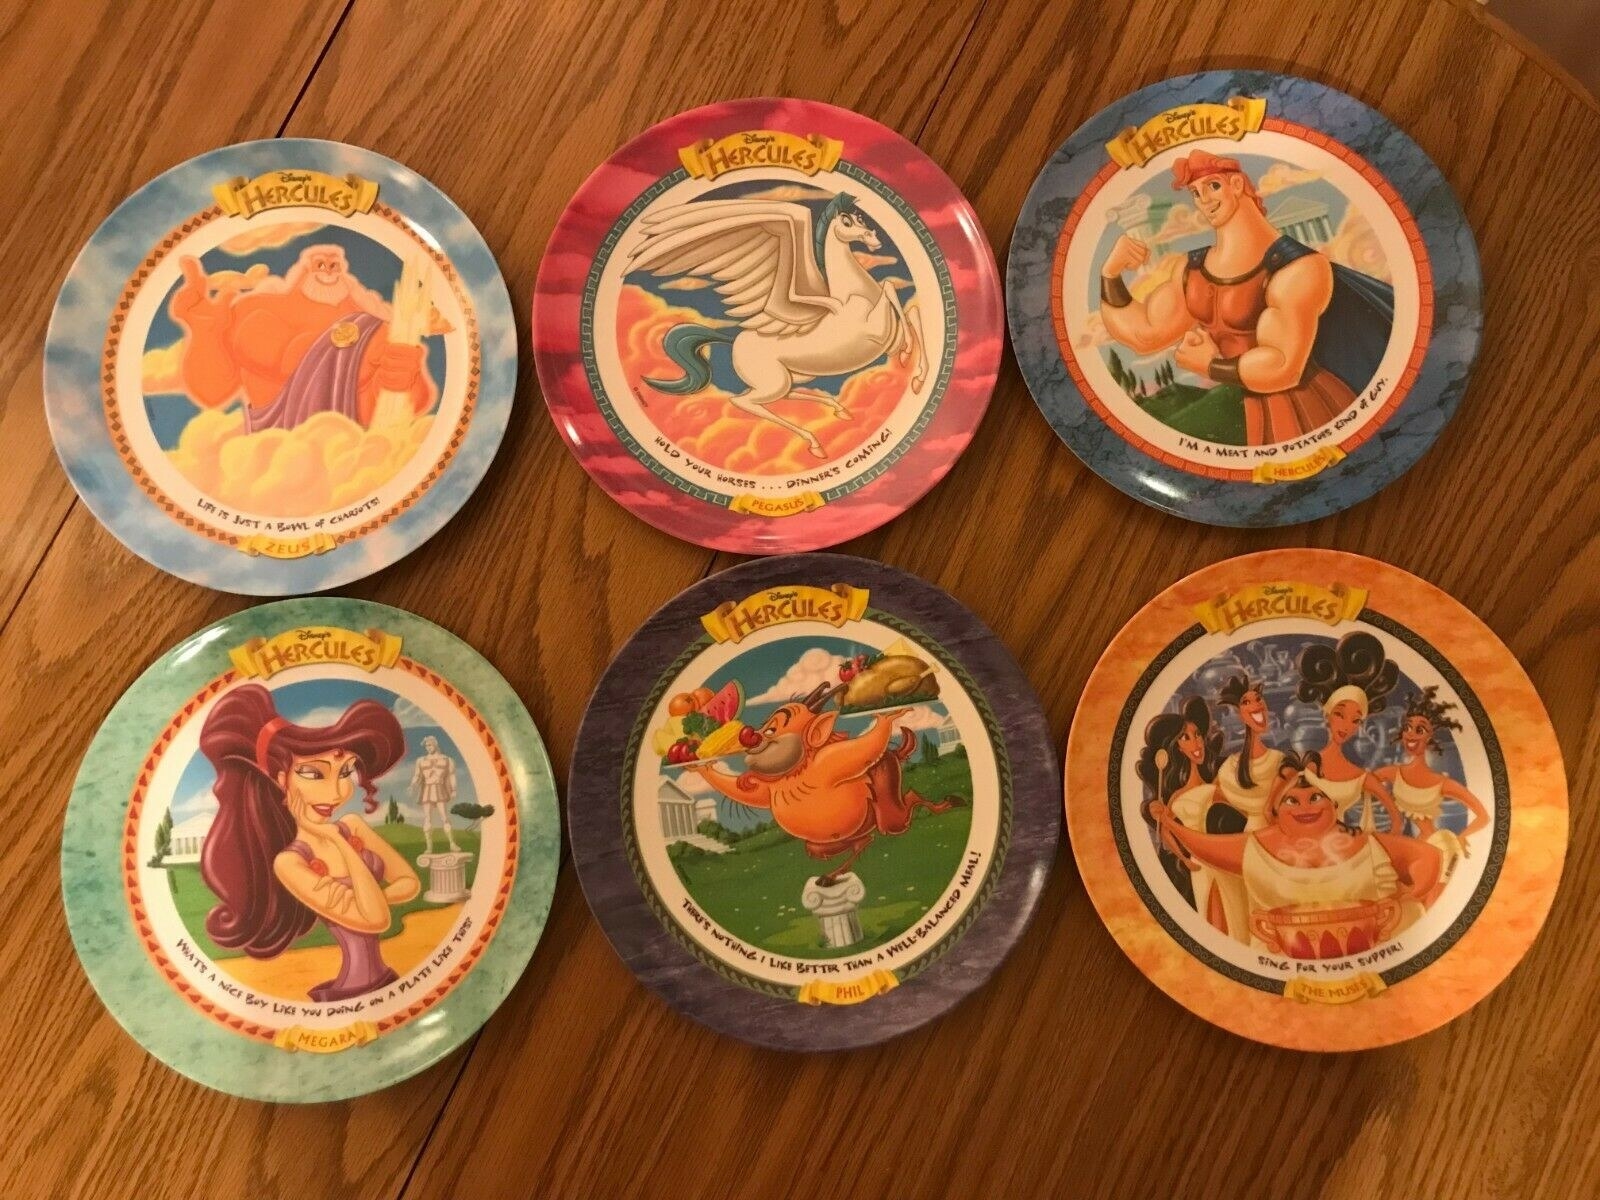 Six Hercules plates on a wooden table